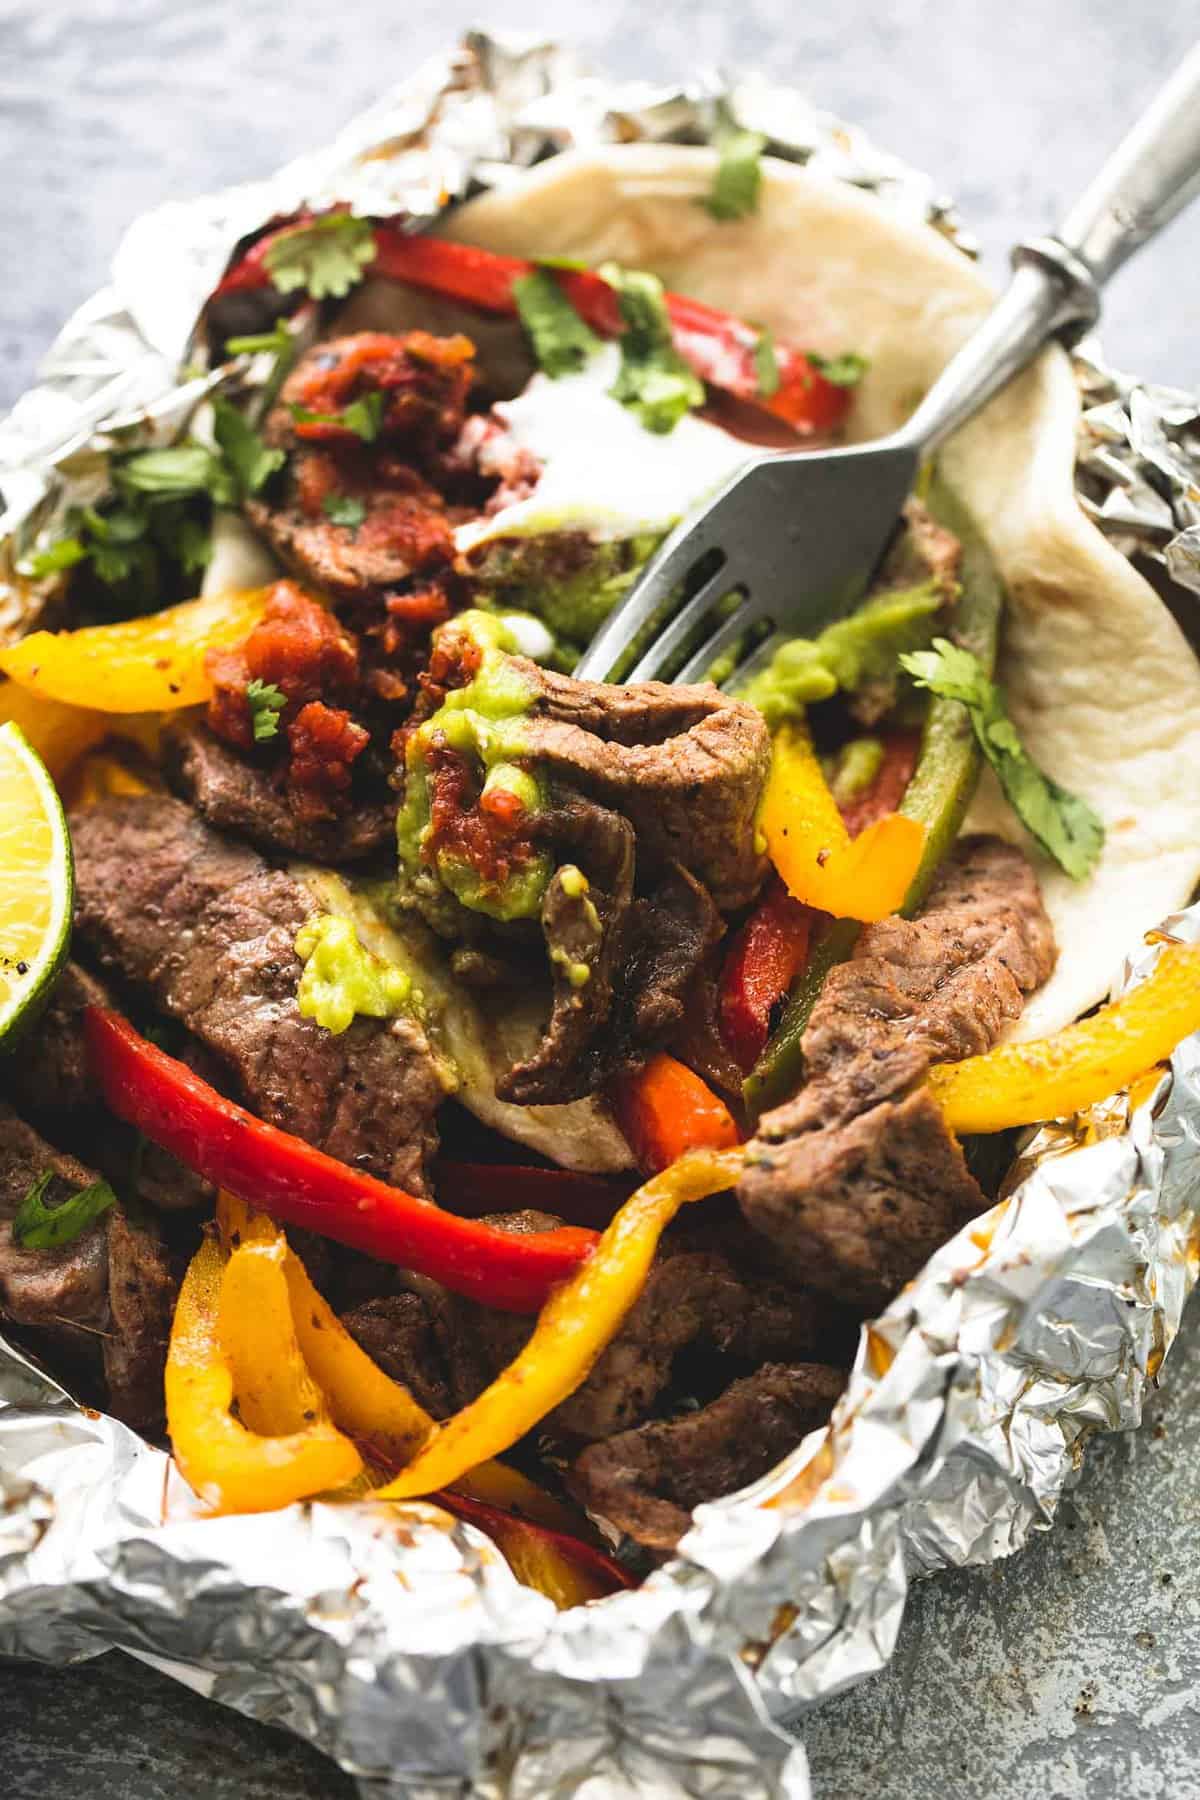 Strips of steak and peppers in foil.